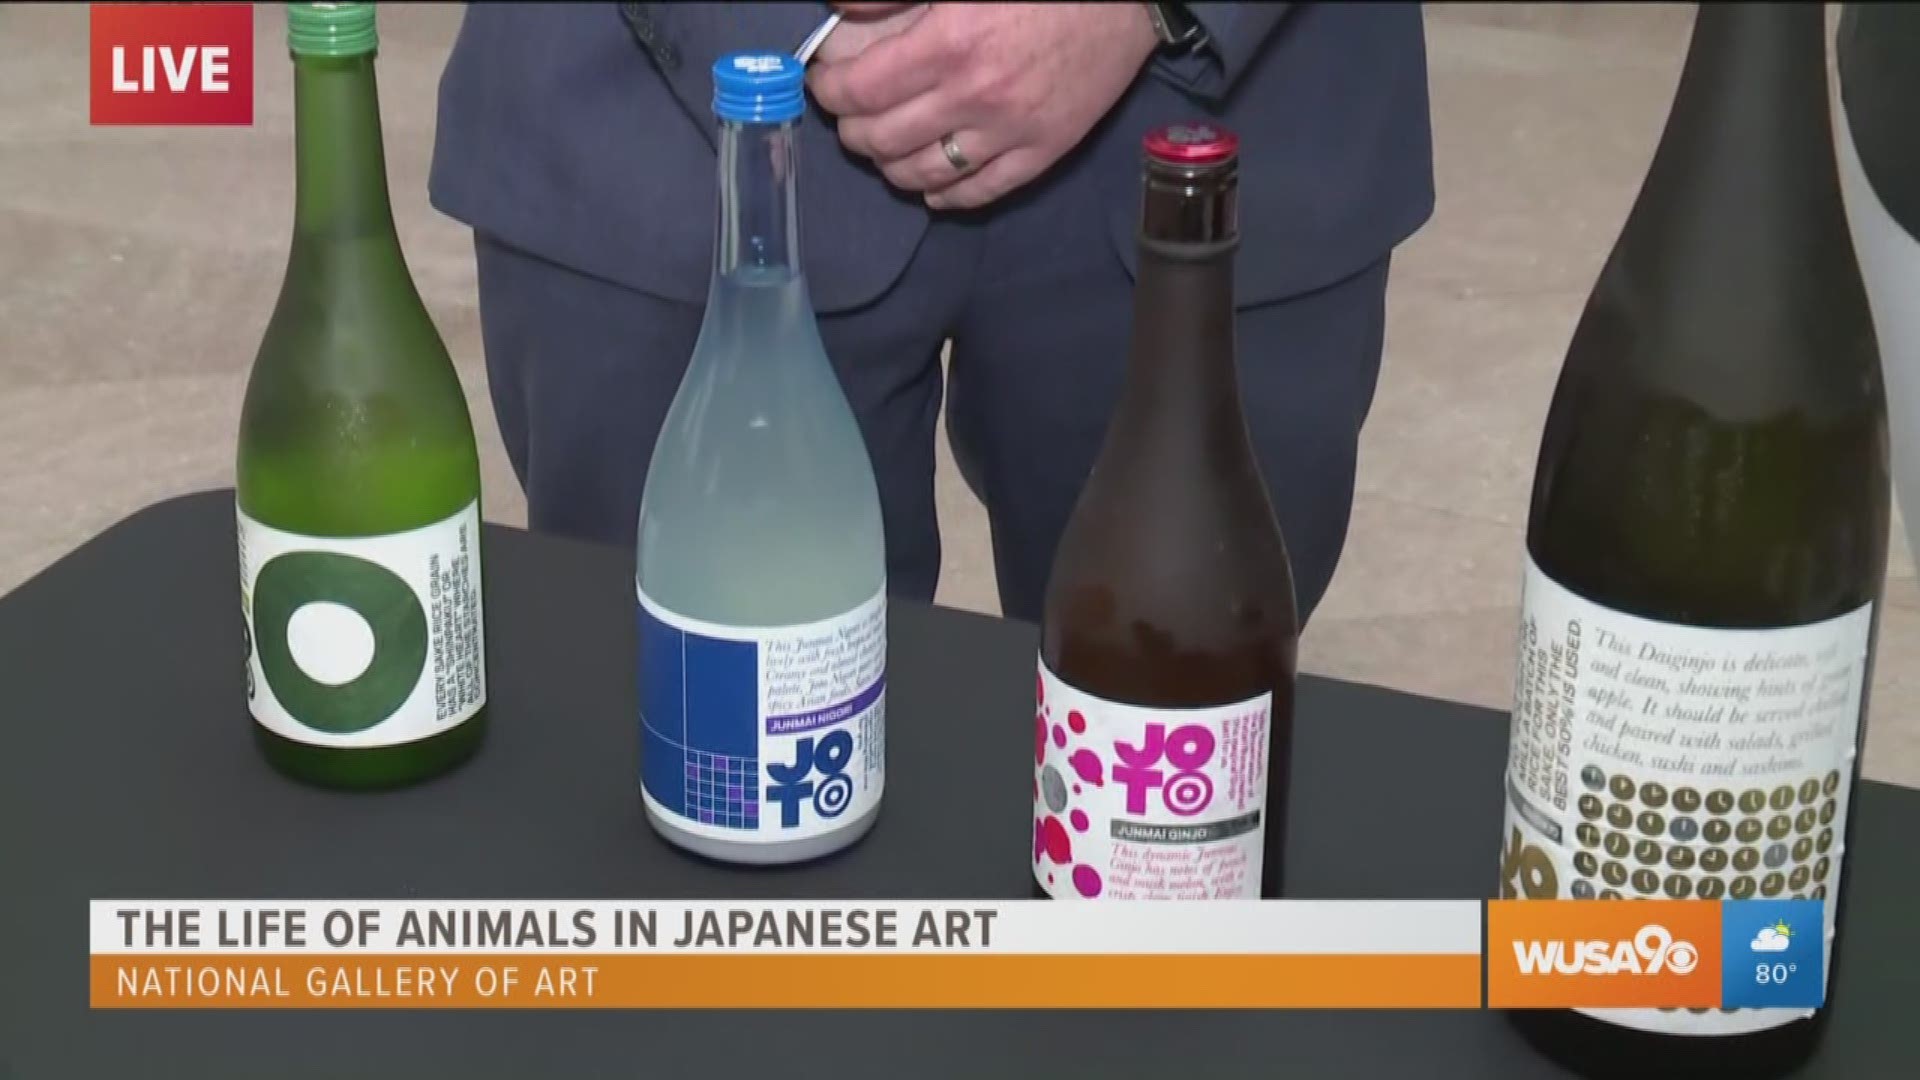 Sommelier Aaron Beavers talks to Andi all about four different types of sake. To taste the sake yourself, there will be a sake tasting this Saturday night at the Animals in Japanese Art exhibit at the National Gallery of Art.